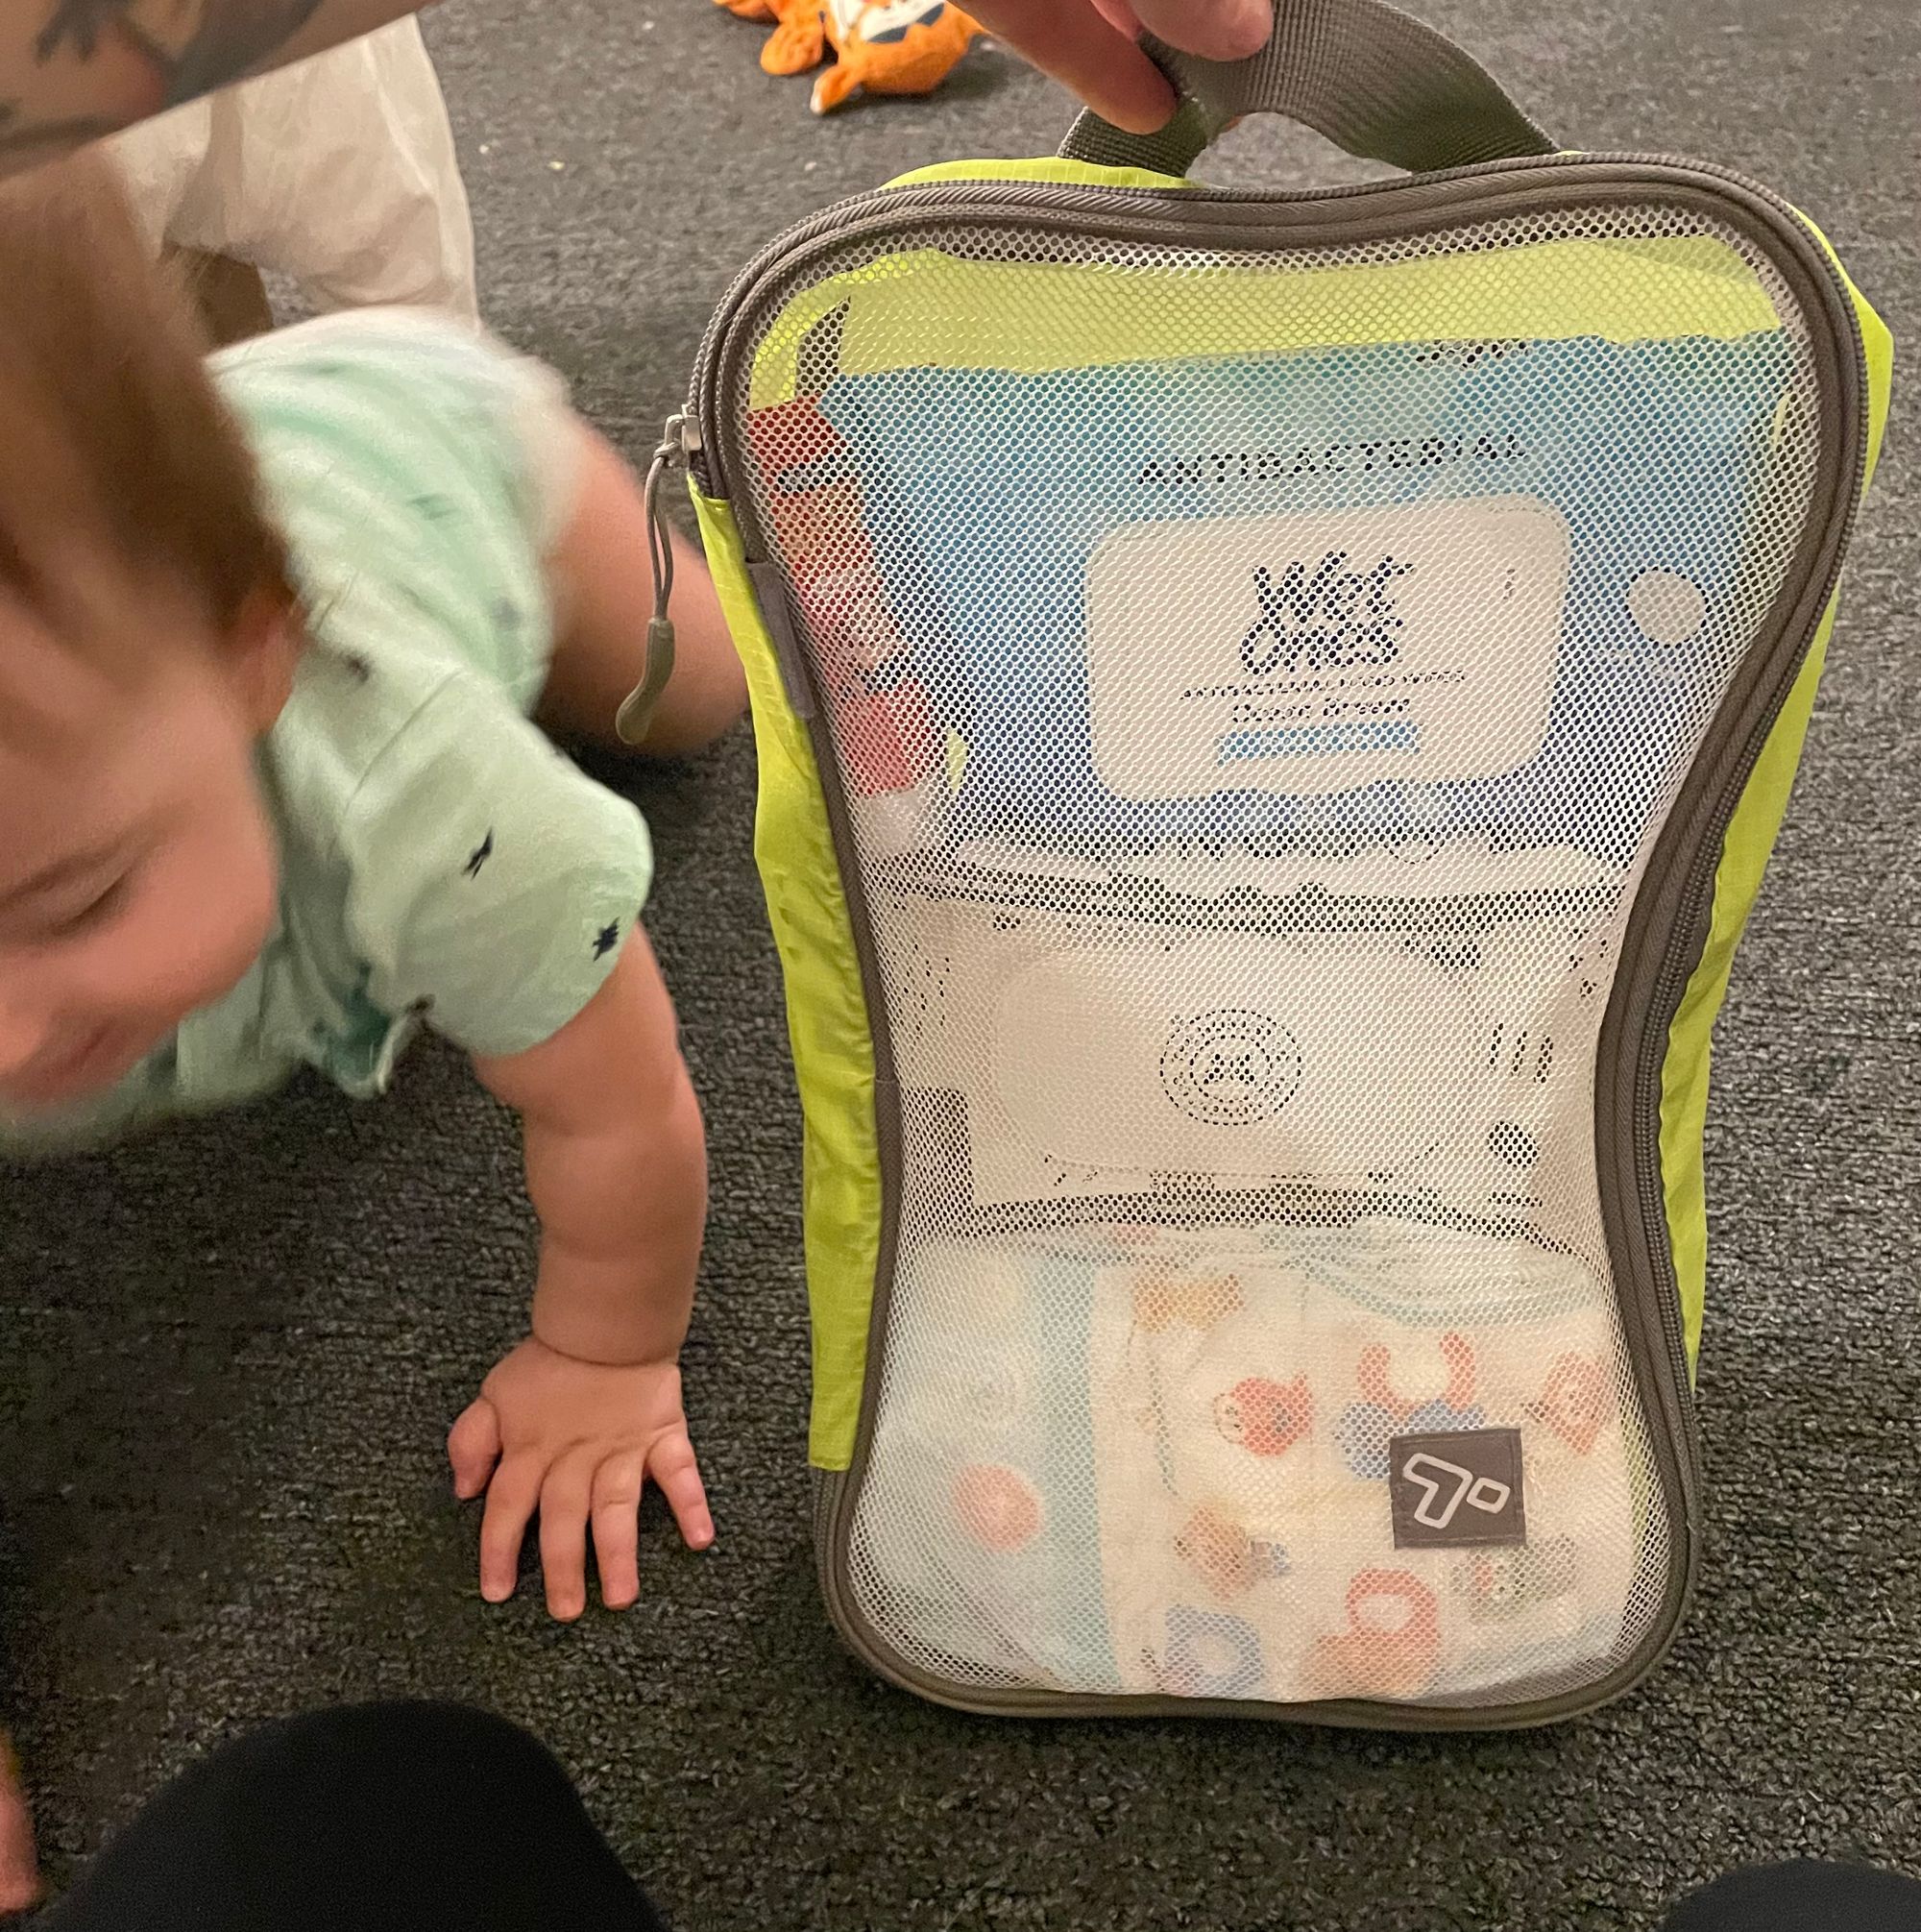 Diaper bag for traveling with an infant